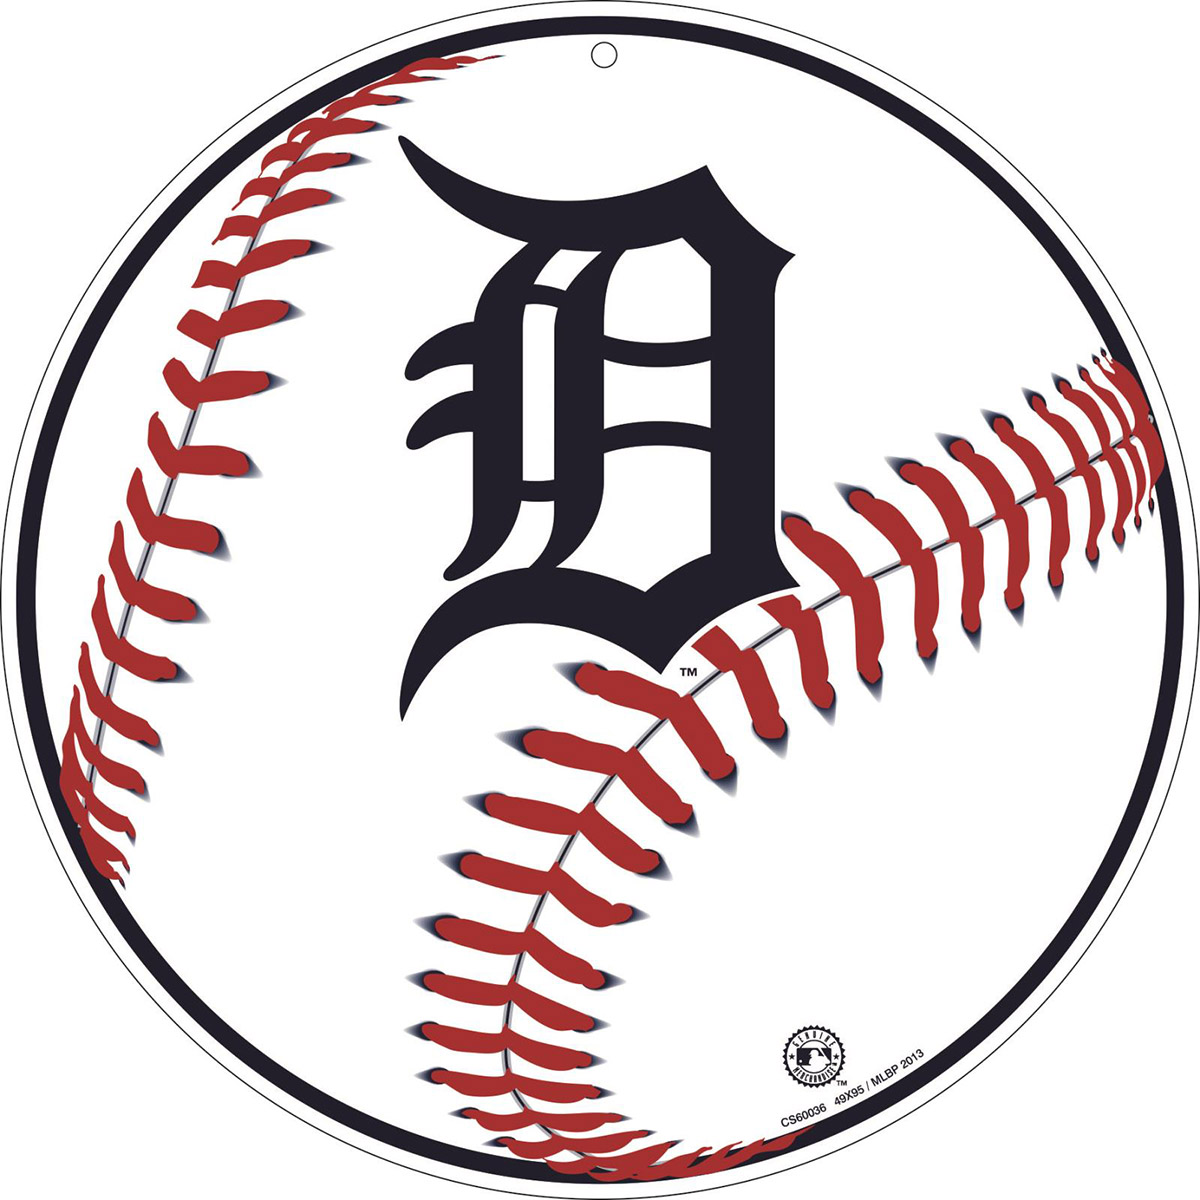 Detroit Tigers Clipart at GetDrawings.com | Free for personal use